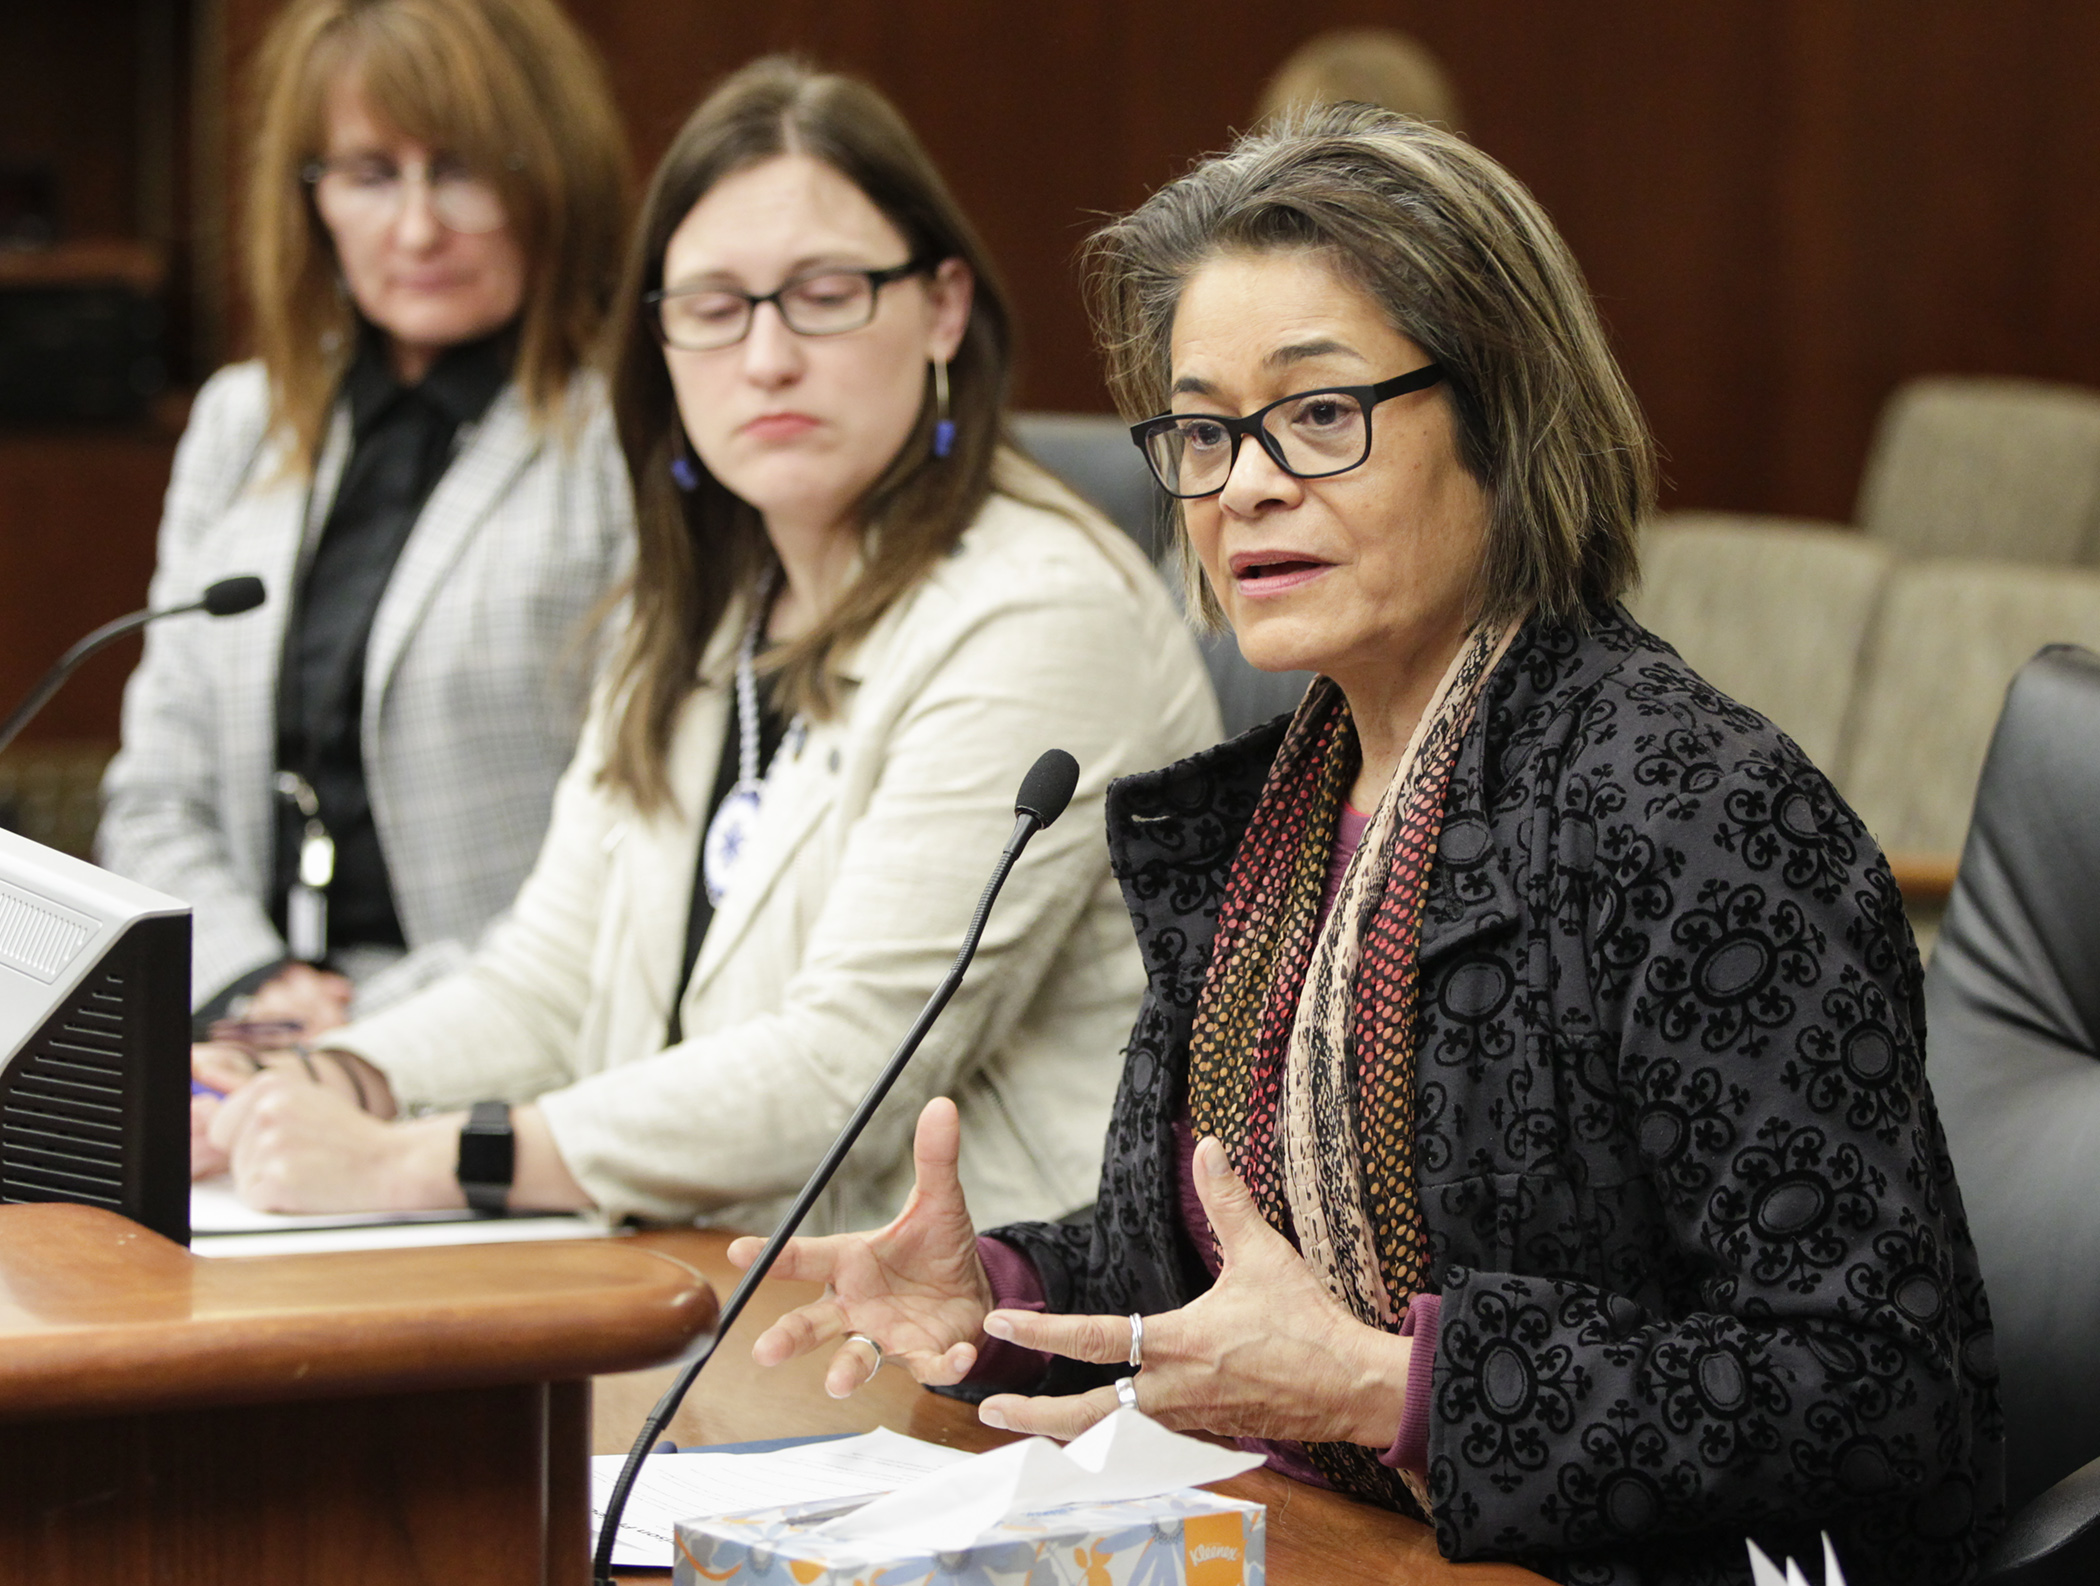 Deborah Jiang-Stein, CEO of the unPrison Project, testifies in the House Corrections Division on HF754 to establish a pilot project to facilitate bonding and literacy for incarcerated women and their children. Photo by Paul Battaglia